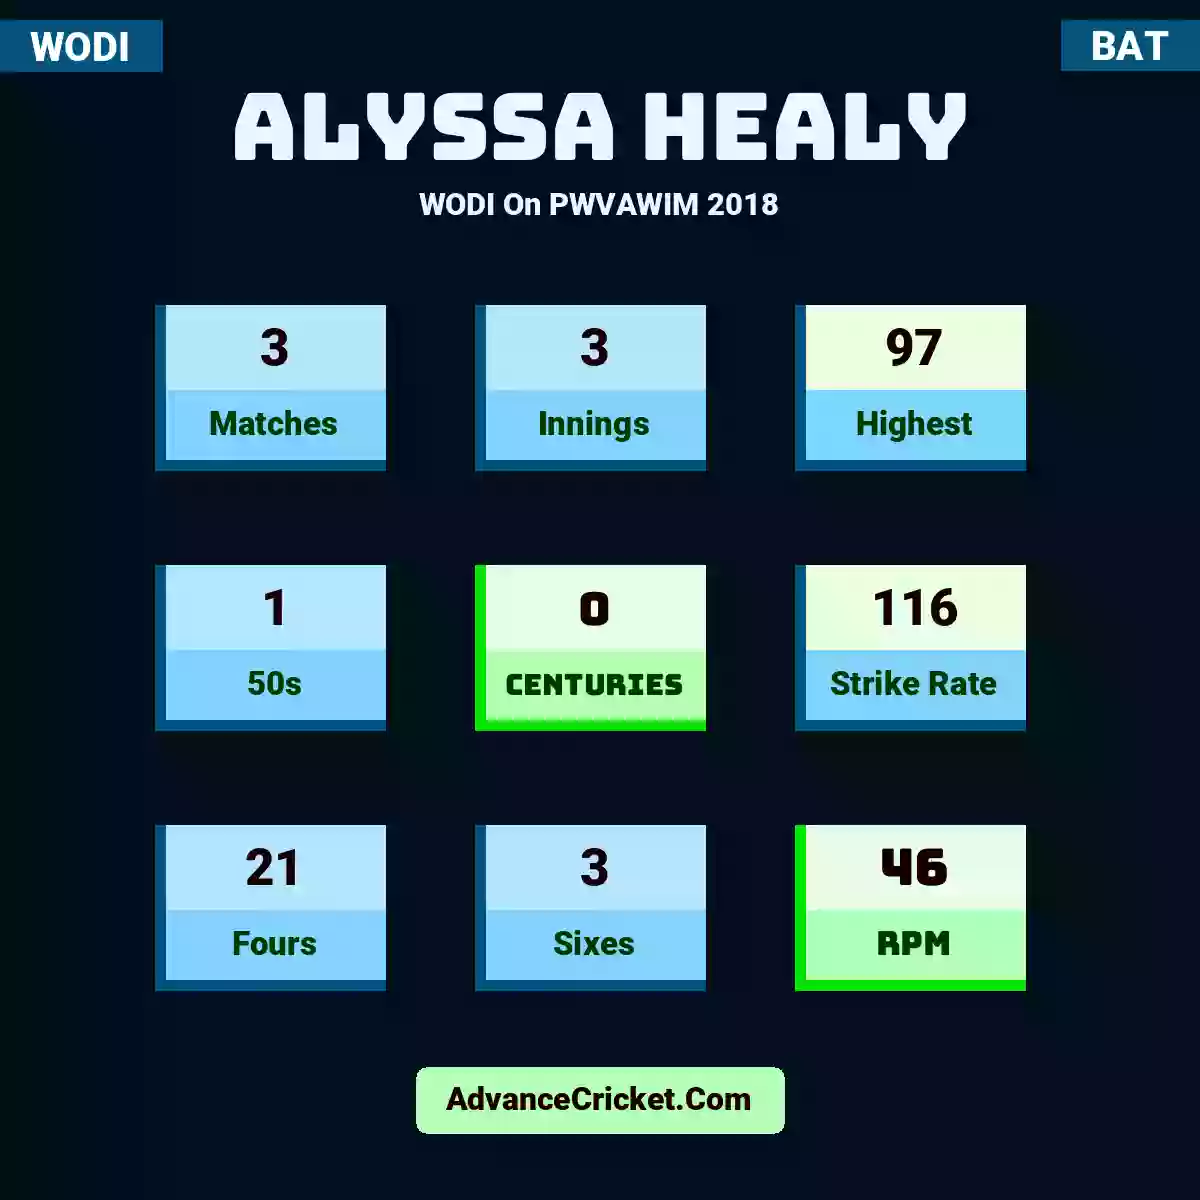 Alyssa Healy WODI  On PWVAWIM 2018, Alyssa Healy played 3 matches, scored 97 runs as highest, 1 half-centuries, and 0 centuries, with a strike rate of 116. A.Healy hit 21 fours and 3 sixes, with an RPM of 46.